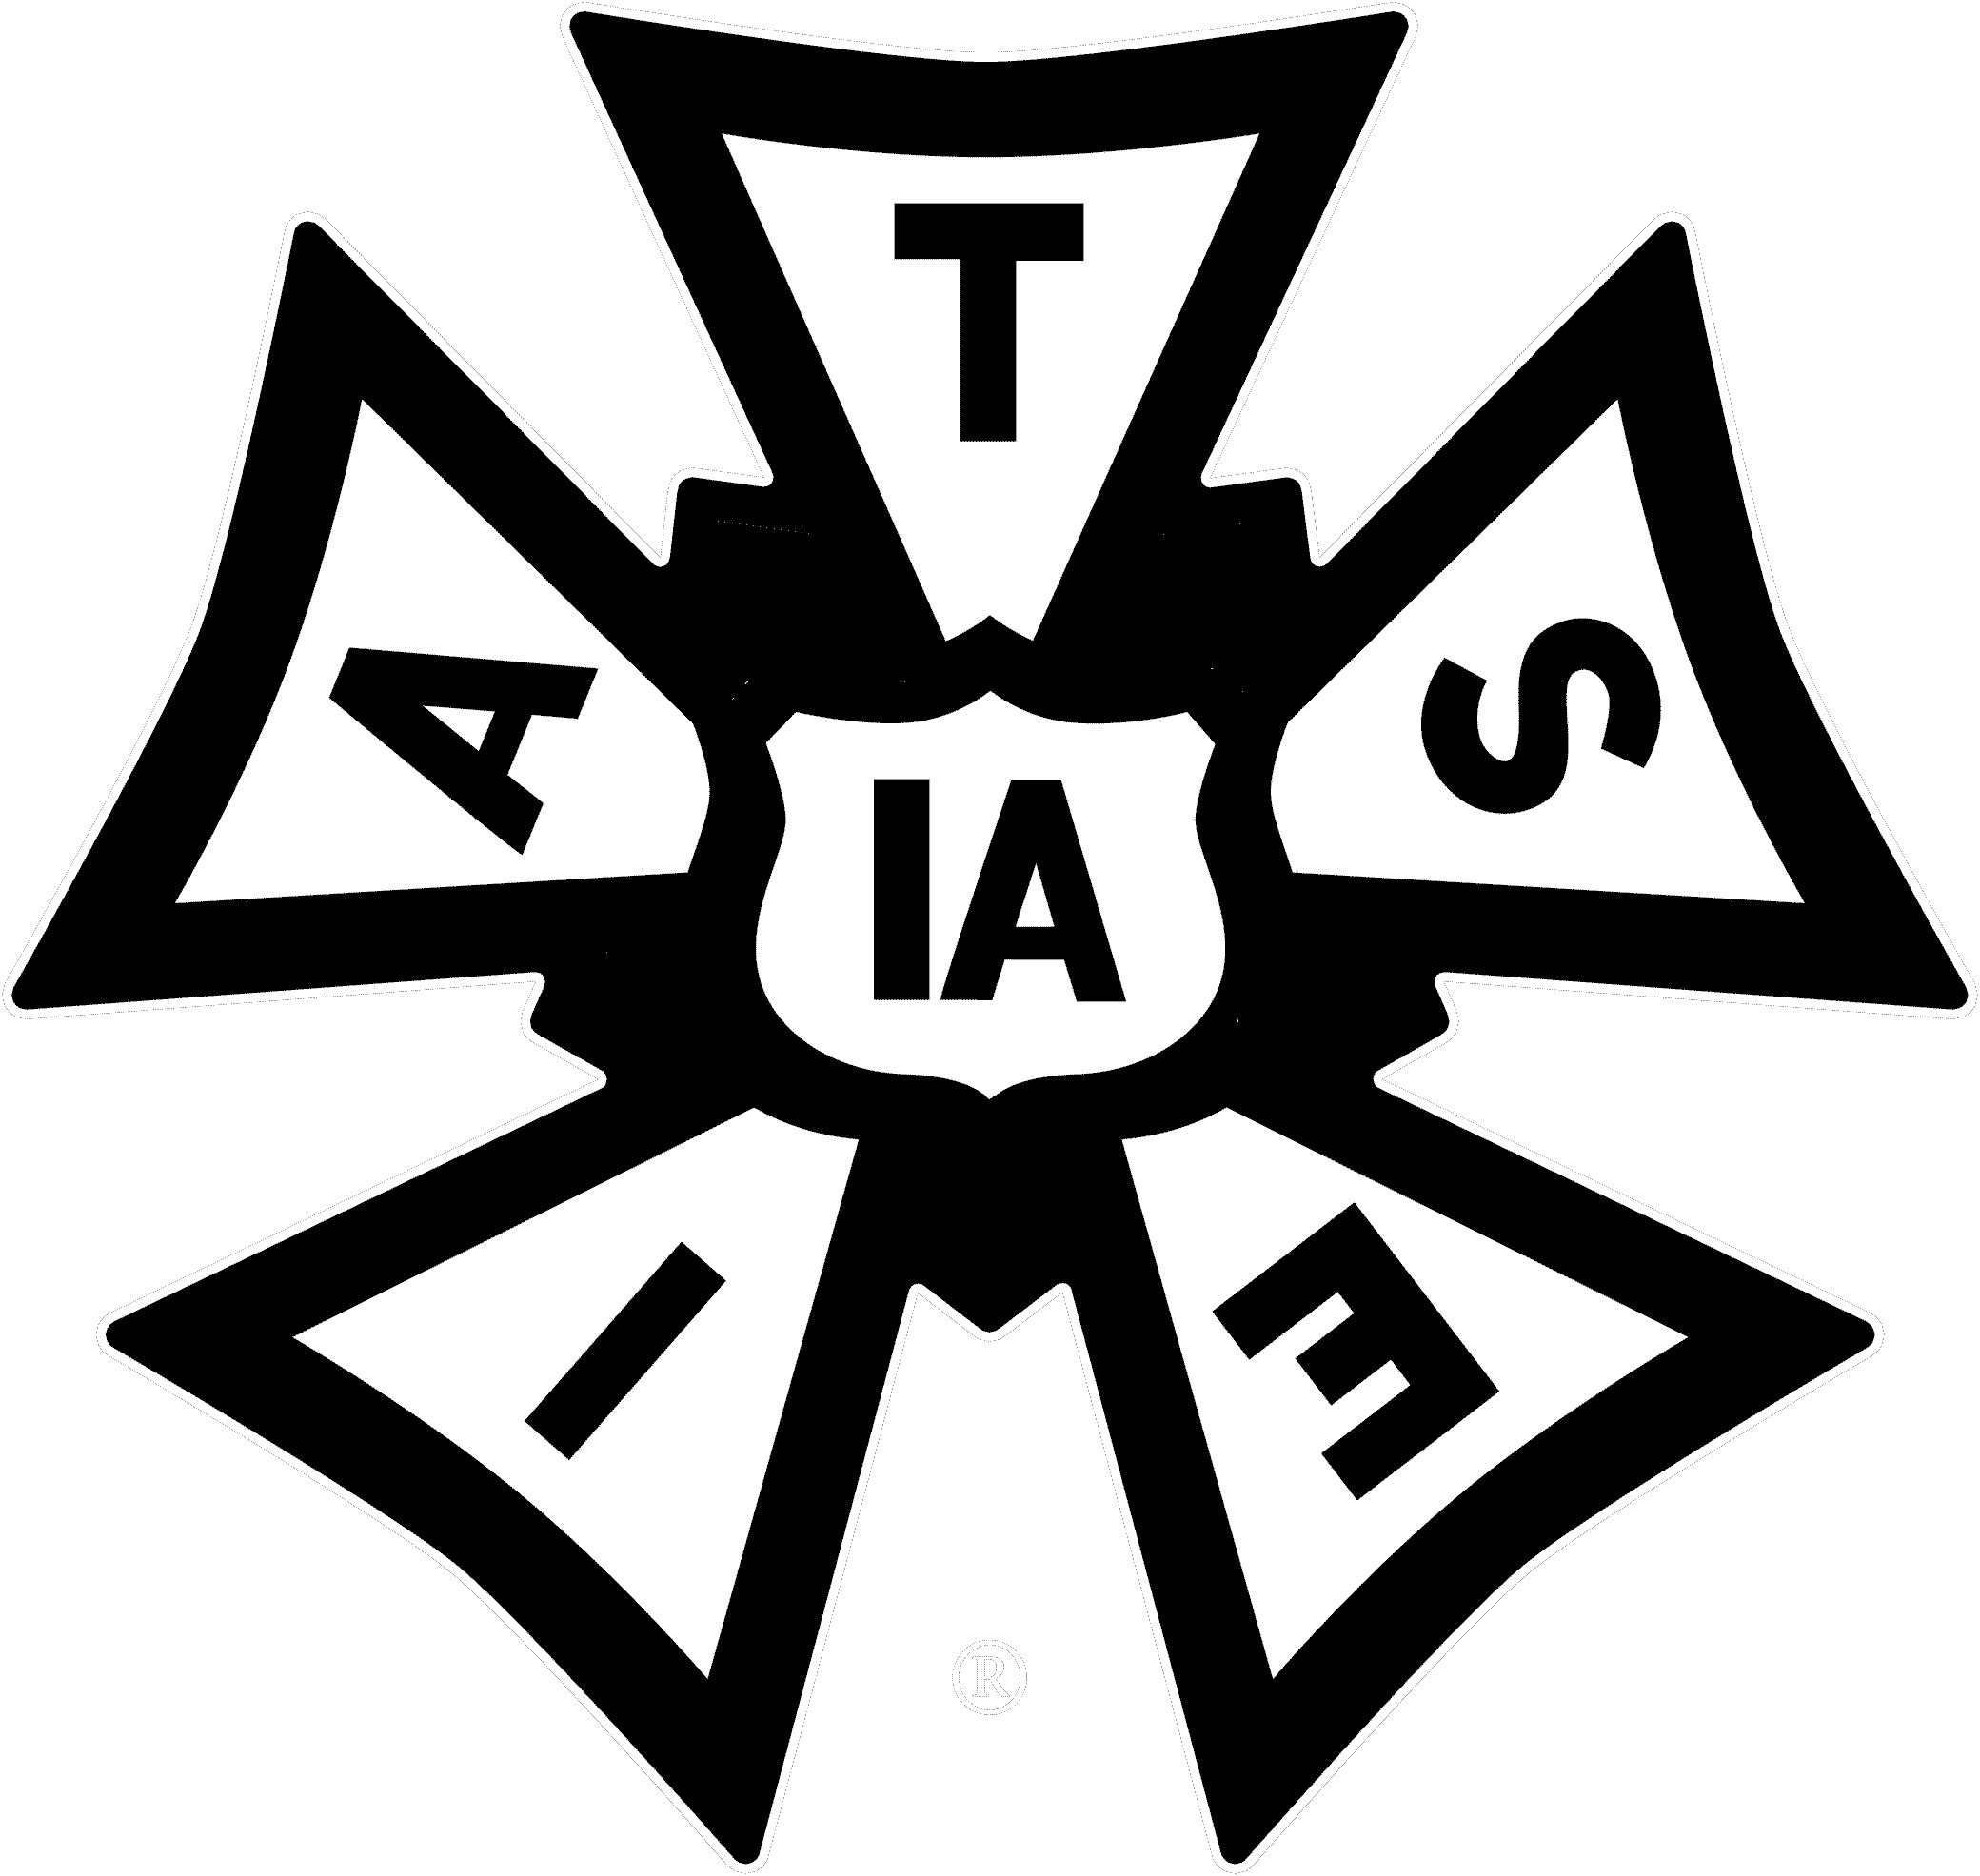 International Alliance of Theatrical Stage Employees (or I.A.T.S.E.)